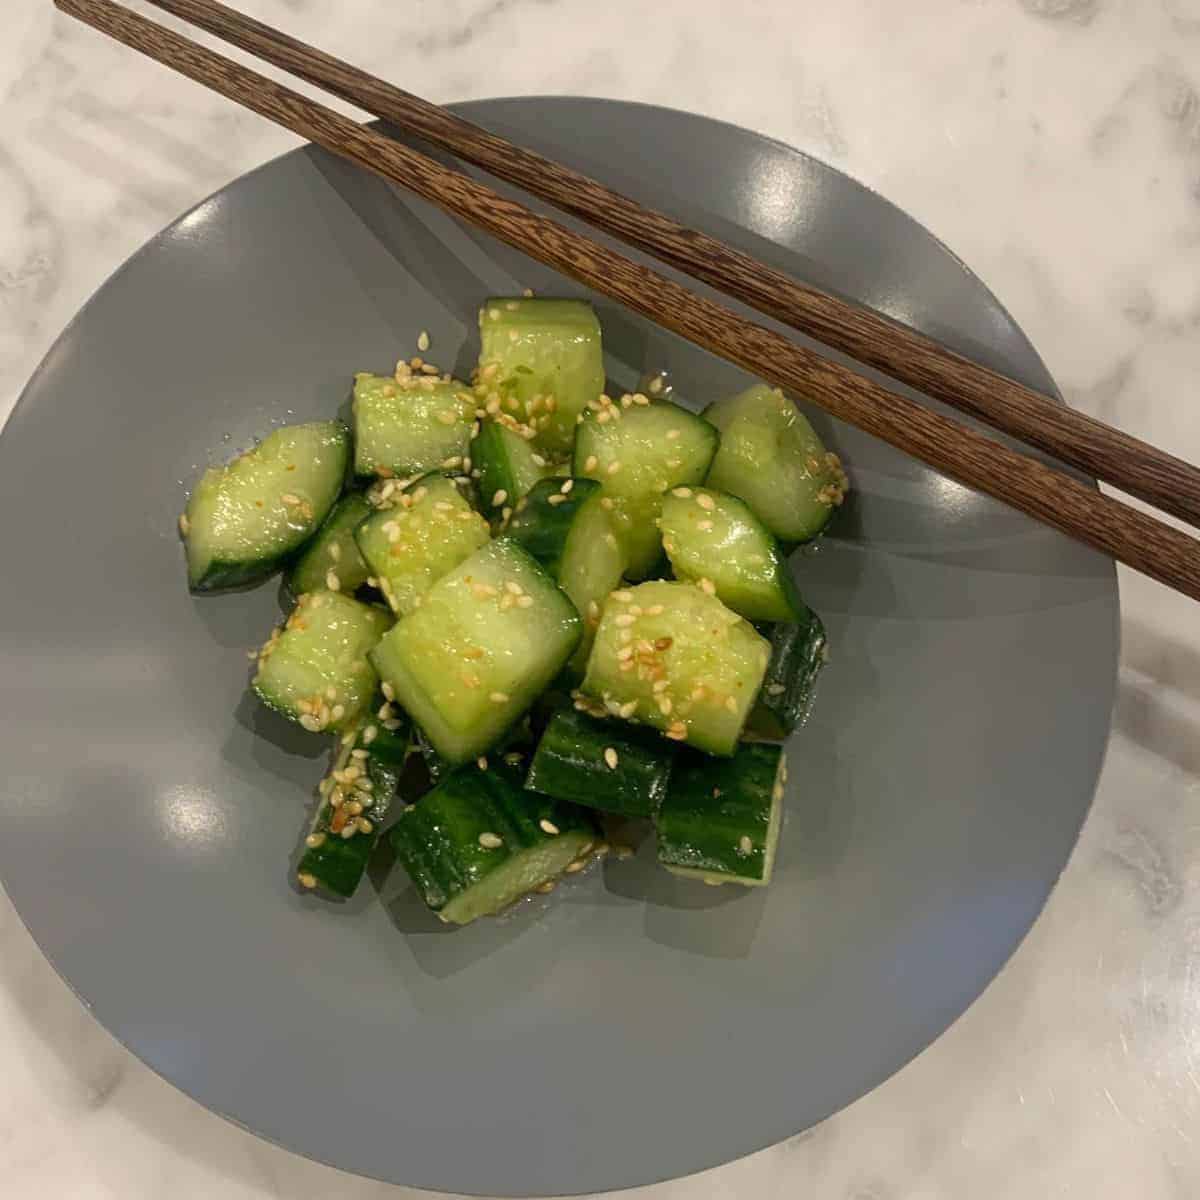 Slightly thick slices of green veggie topped with sesame seeds